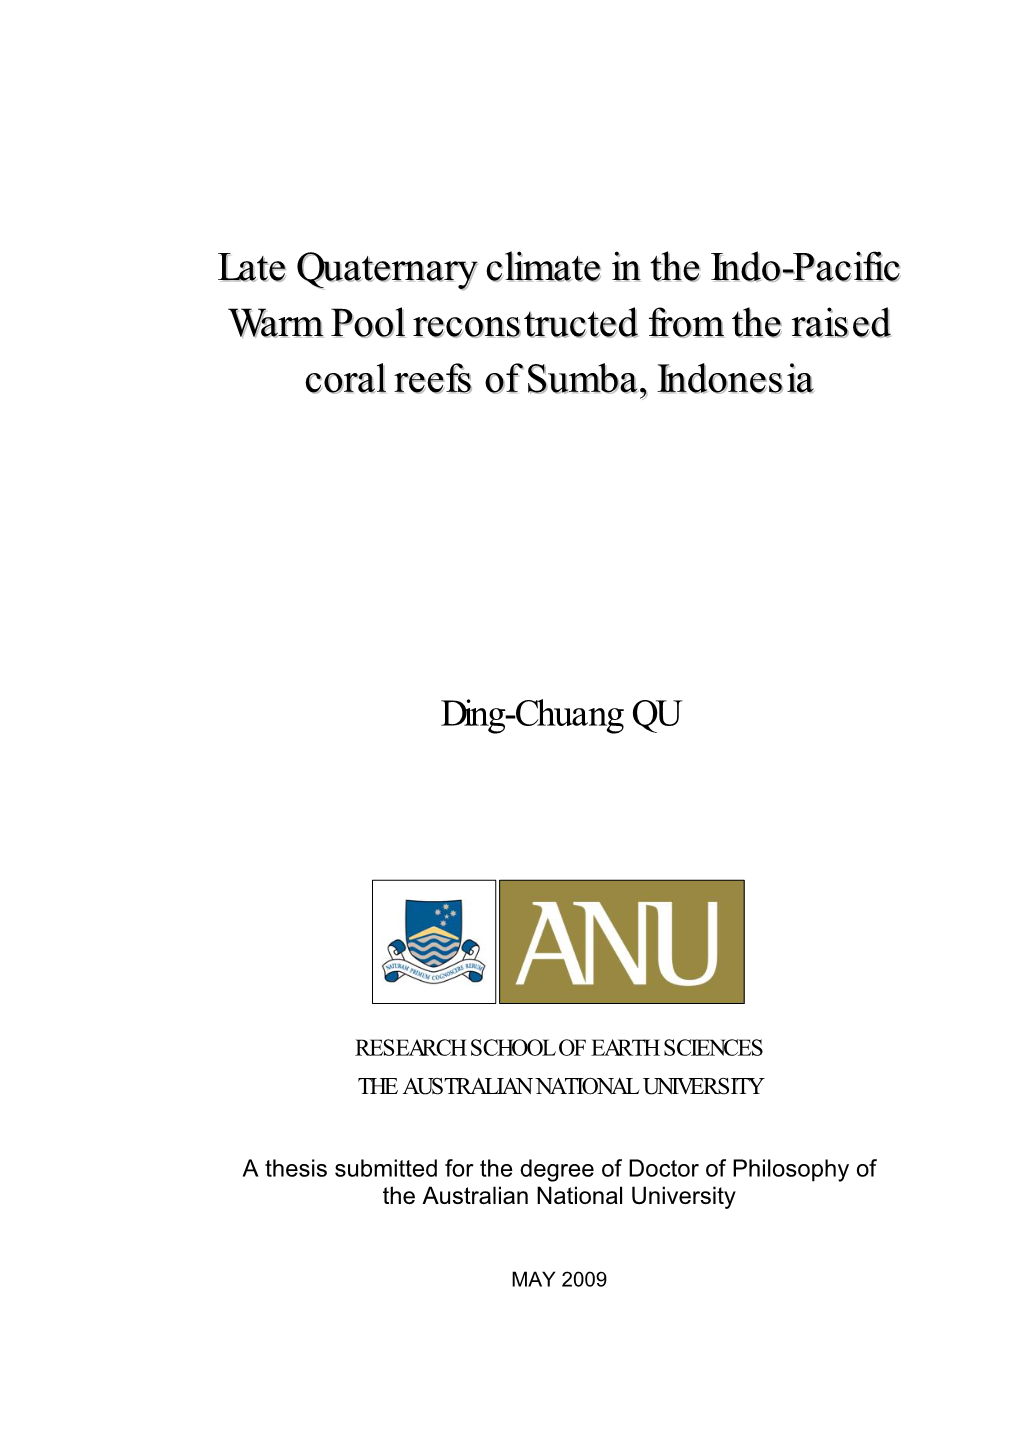 Late Quaternary Climate in the Indo-Pacific Warm Pool Reconstructed